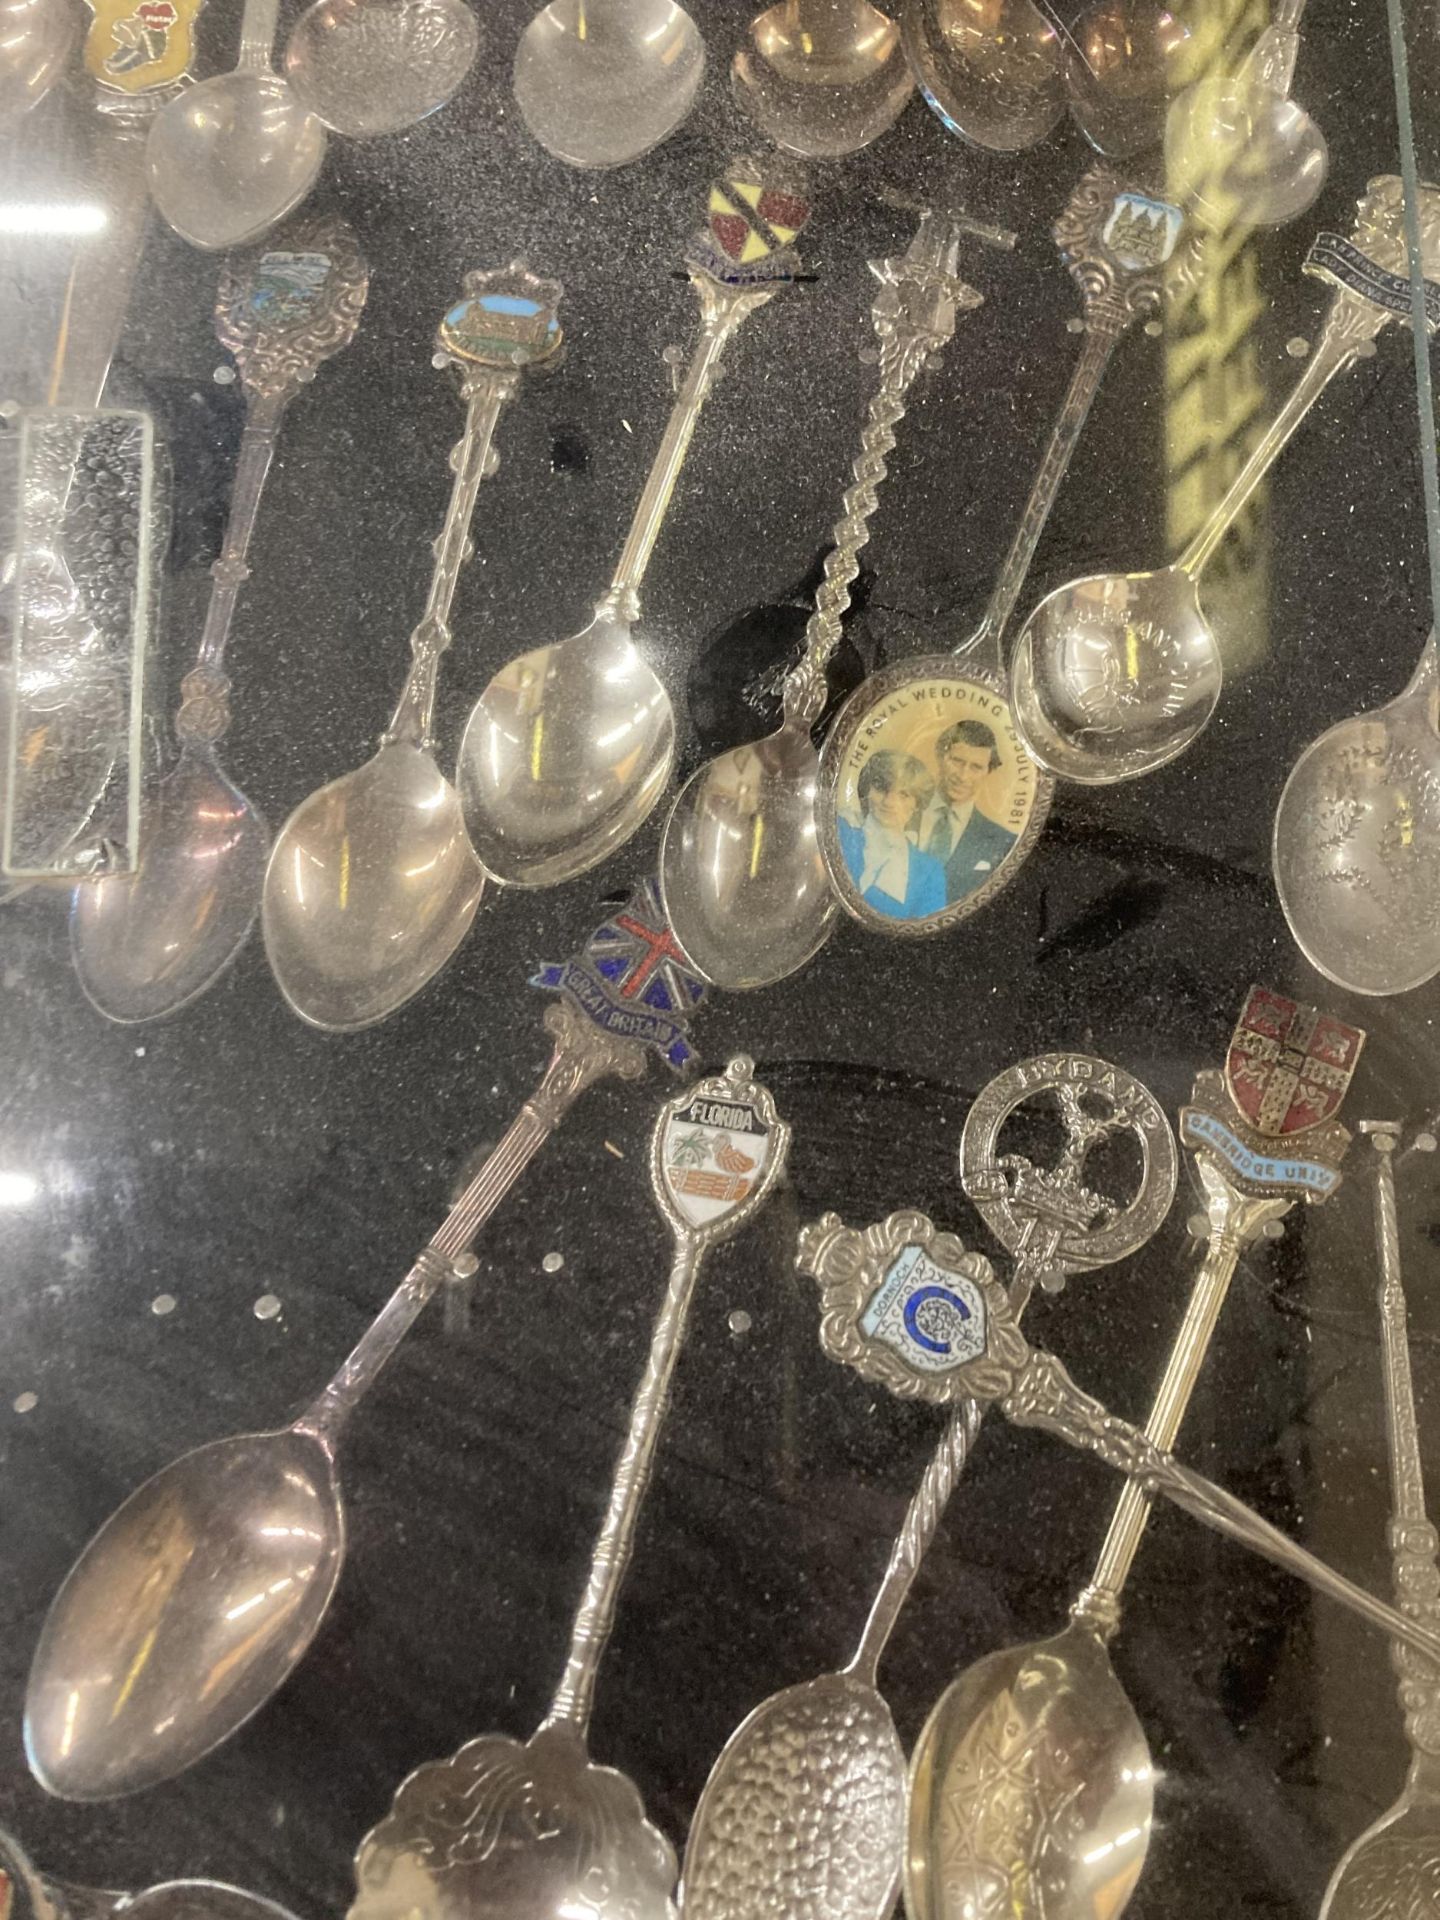 THREE VINTAGE DISPLAY CASES CONTAINING ASSORTED COLLECTABLE SILVER PLATED TEASPOONS - Image 5 of 6